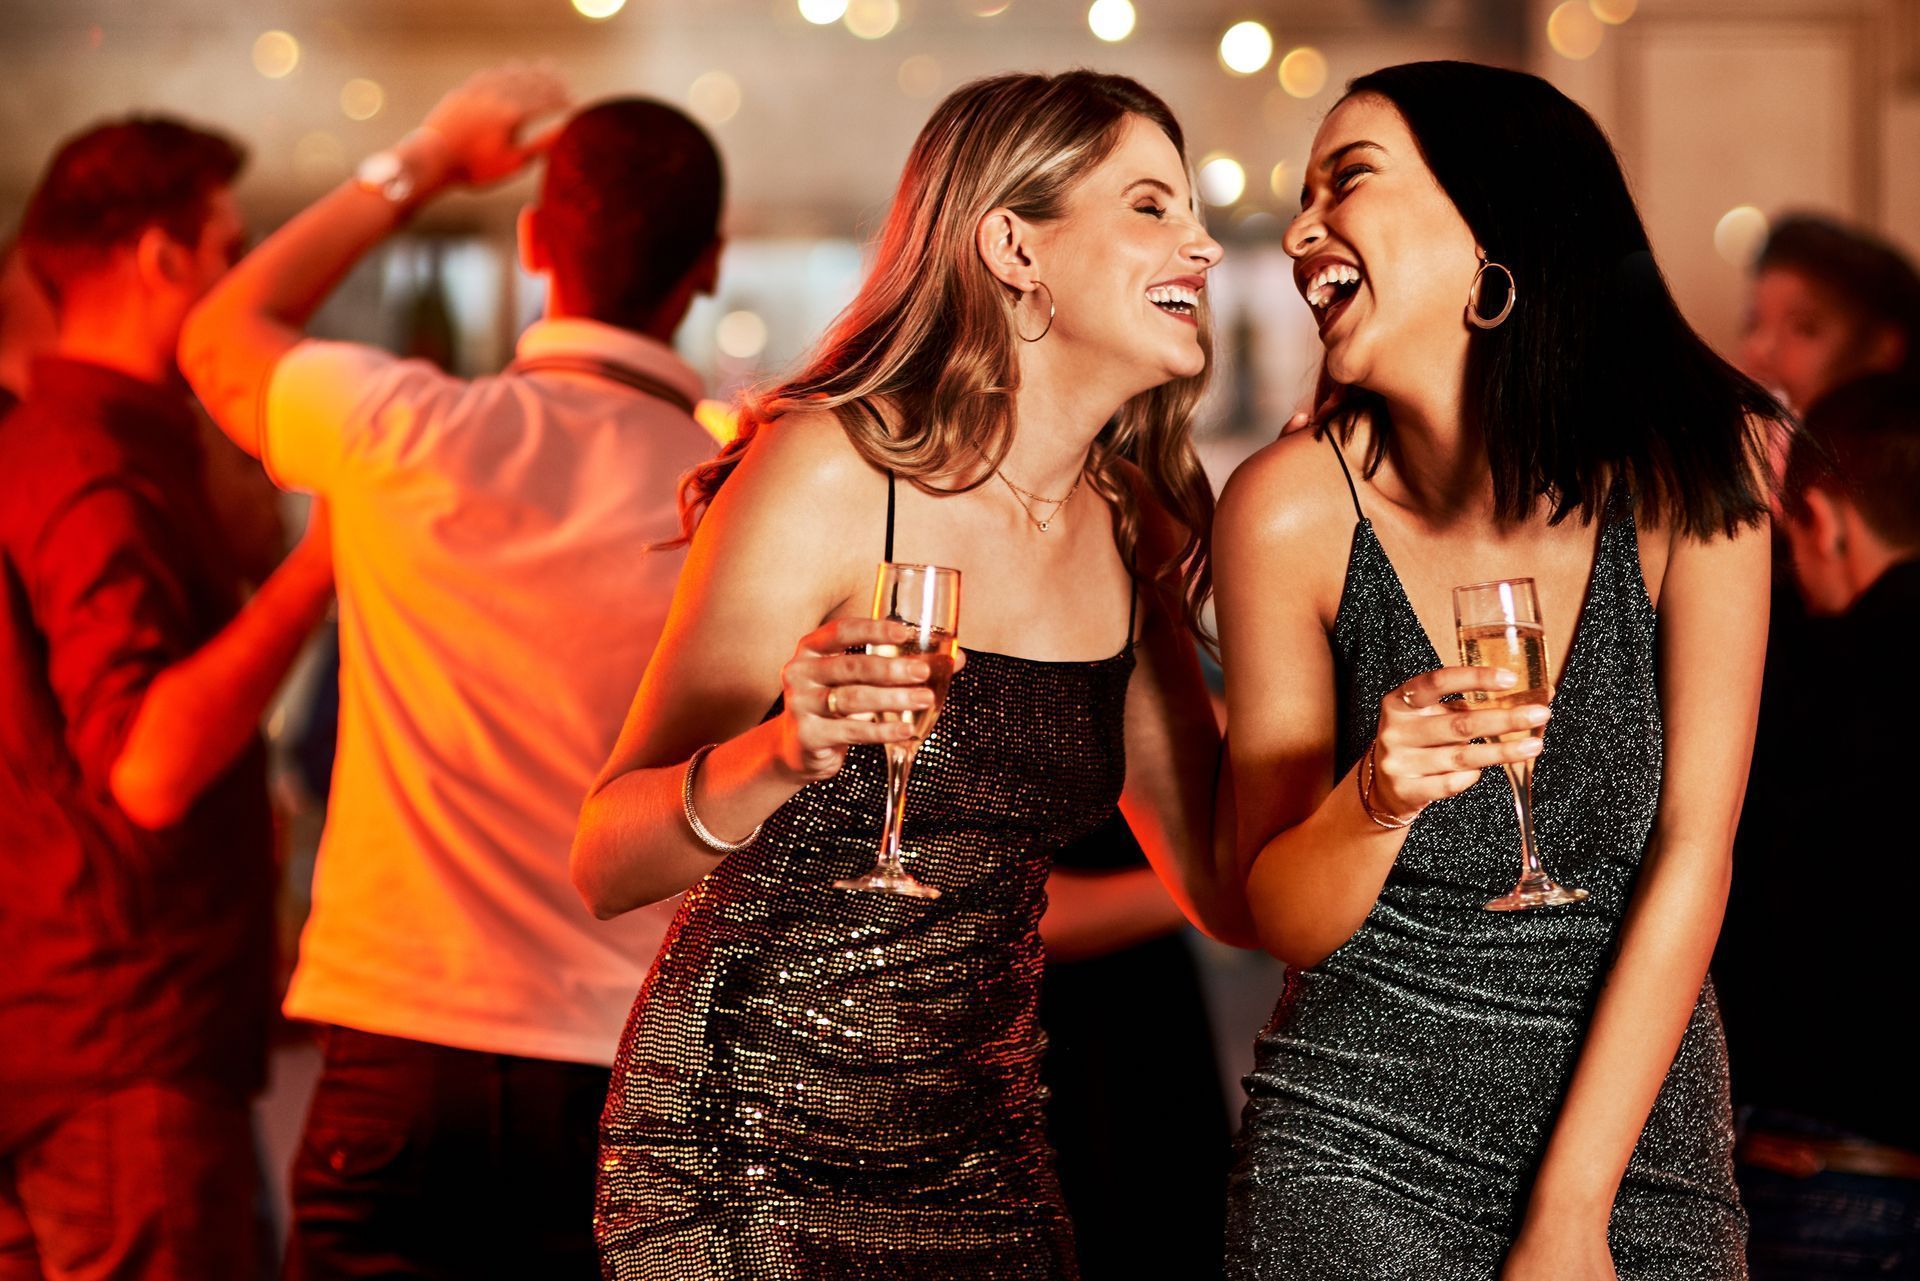 Two women are holding champagne glasses and laughing at a party.